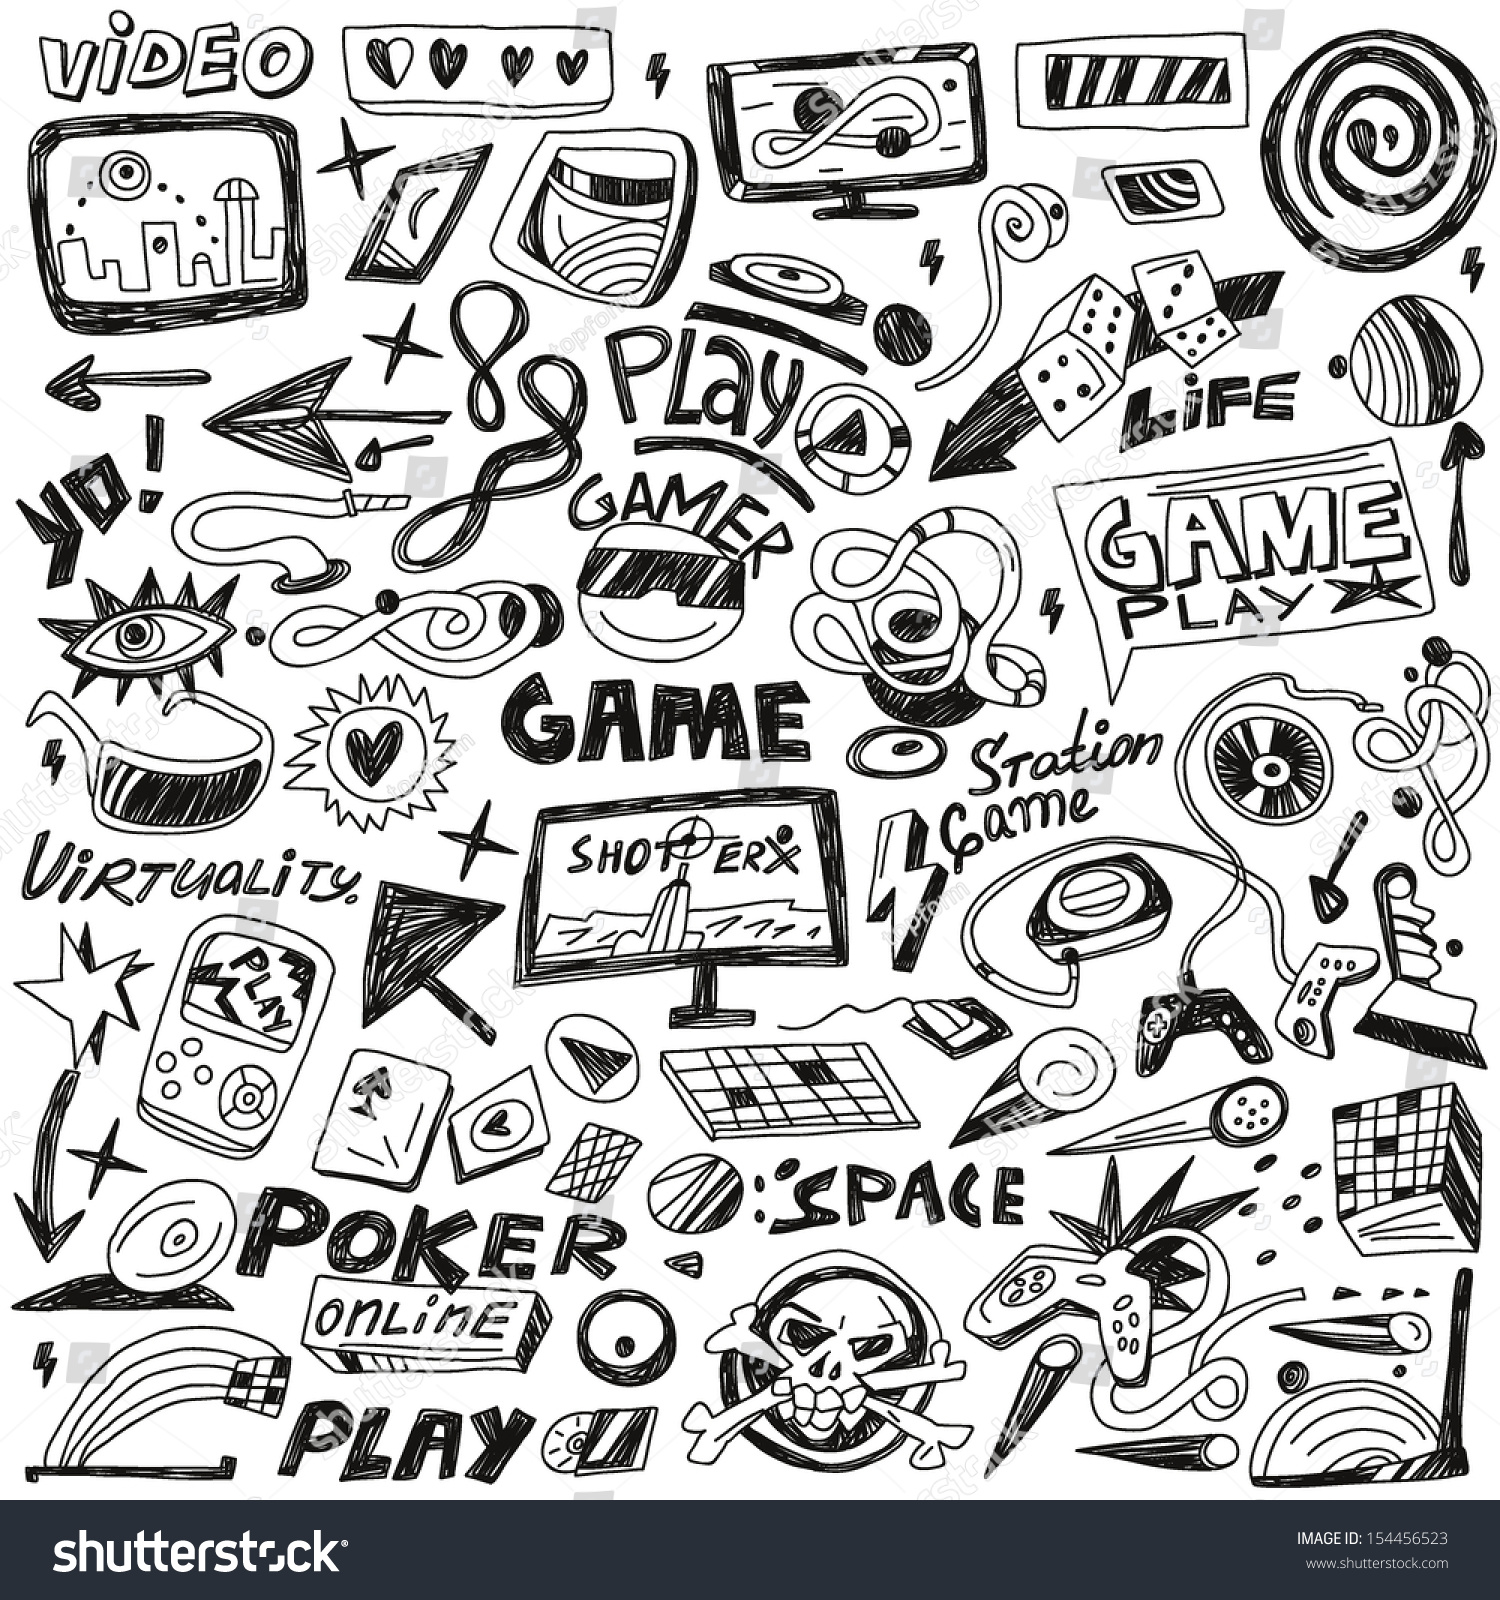 Royalty Free Computers Games Doodles Set 154456523 Stock Photo